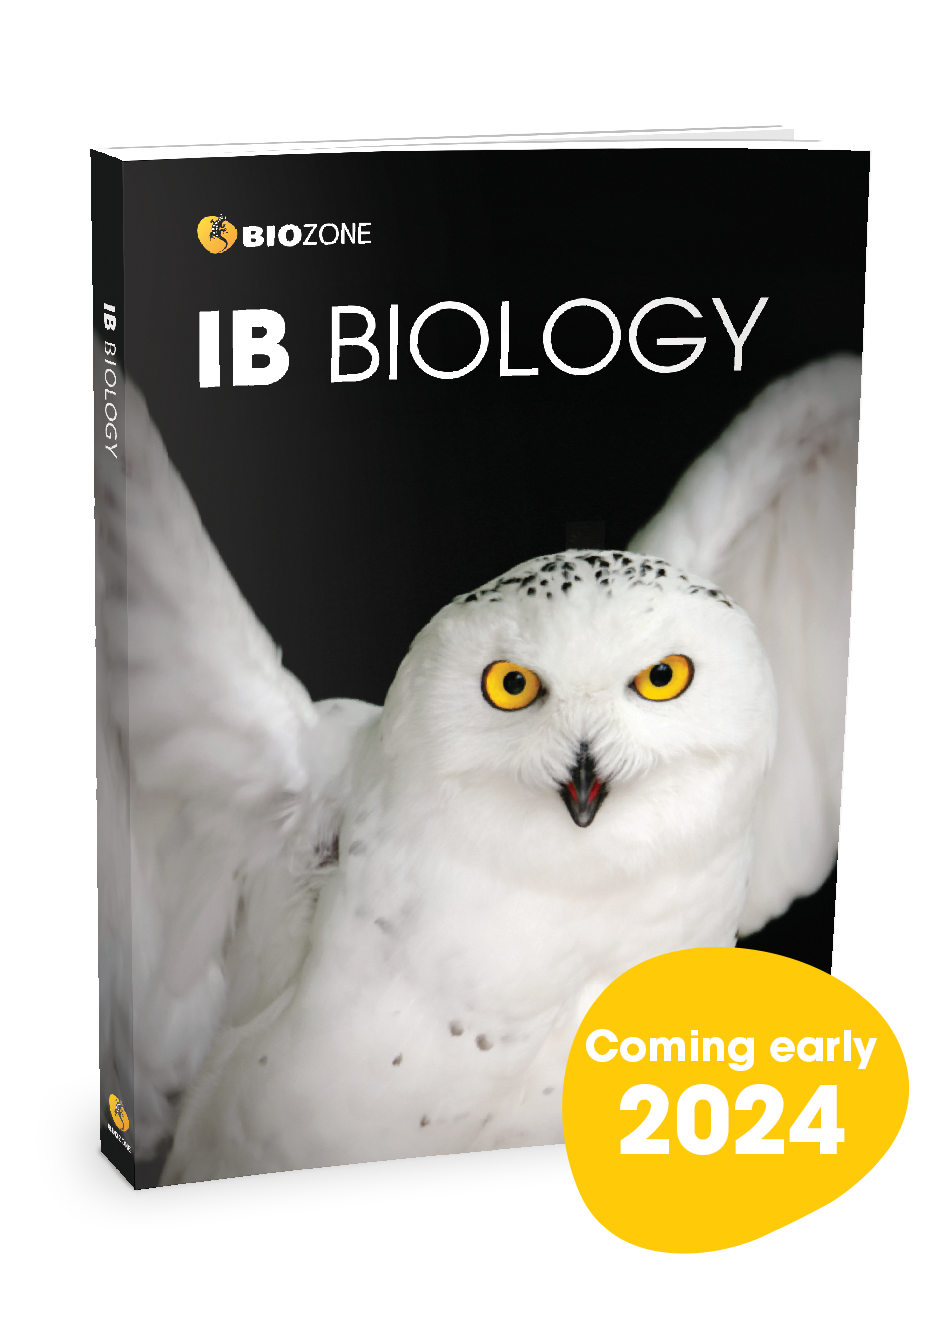 IB Biology with a white owl on the cover